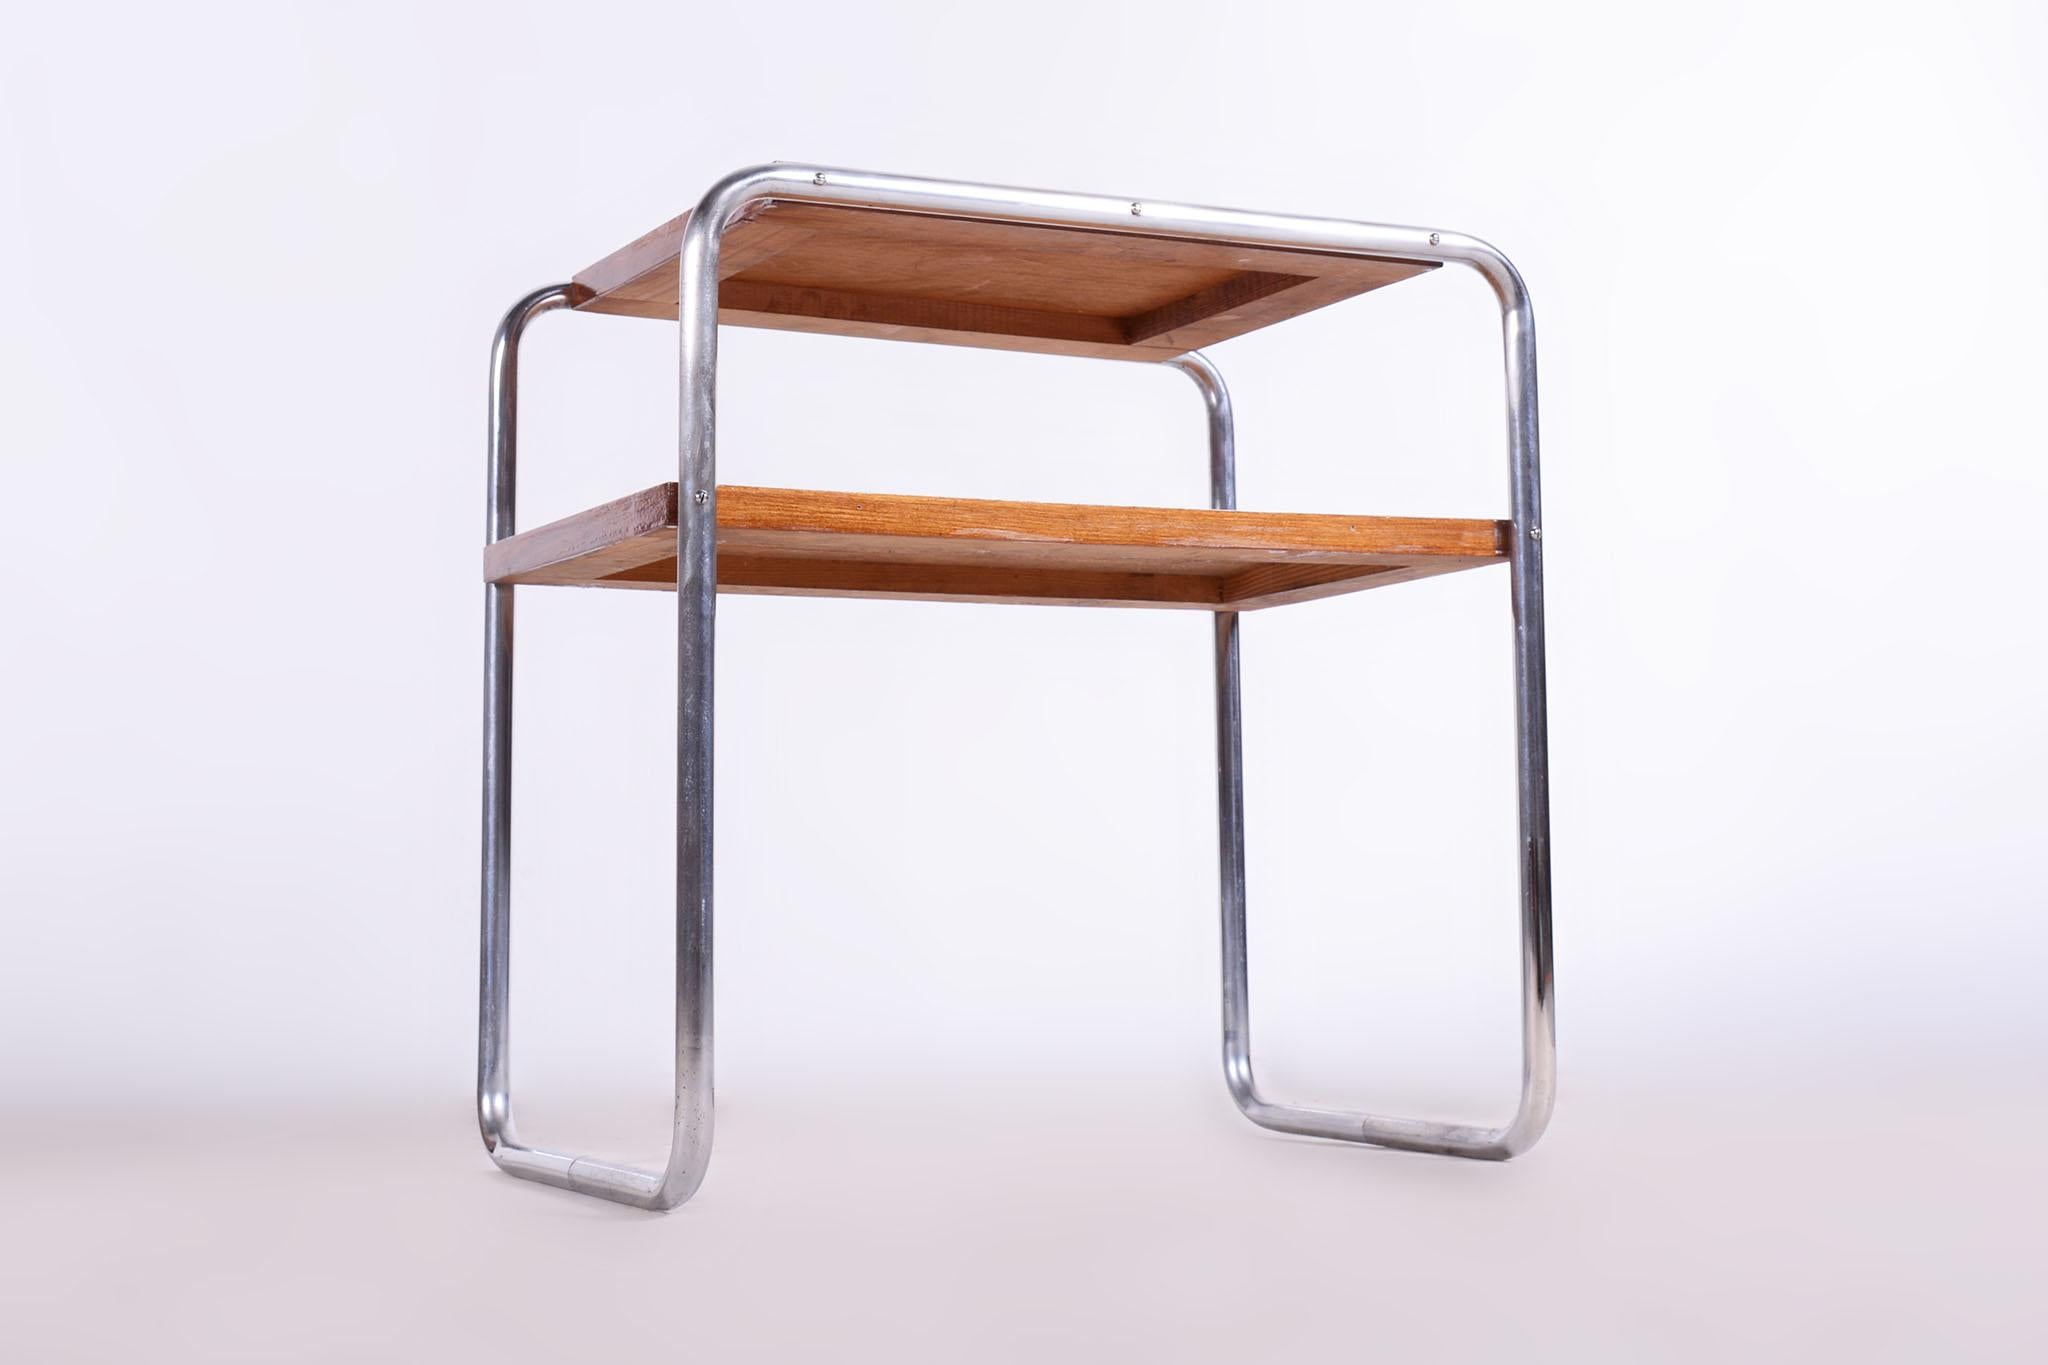 Mid-20th Century Restored Bauhaus Side Table, Oak, Chrome-Plated Steel, Czechia, 1930s For Sale